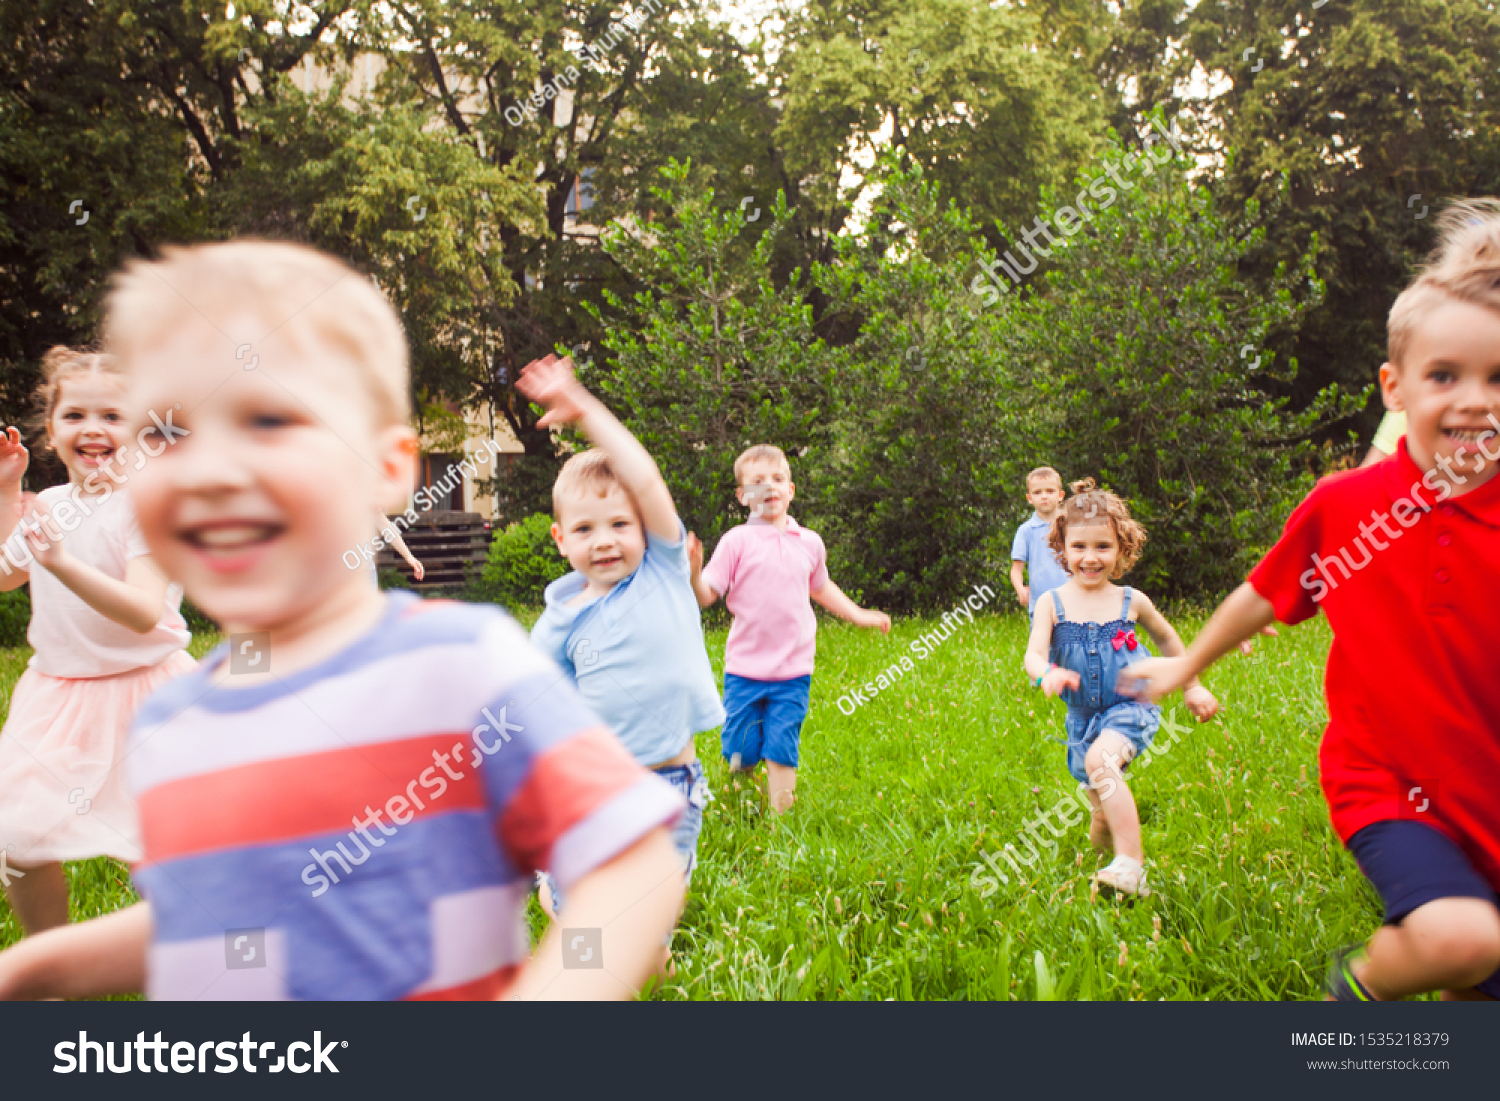 Large group of kids running in the park #1535218379